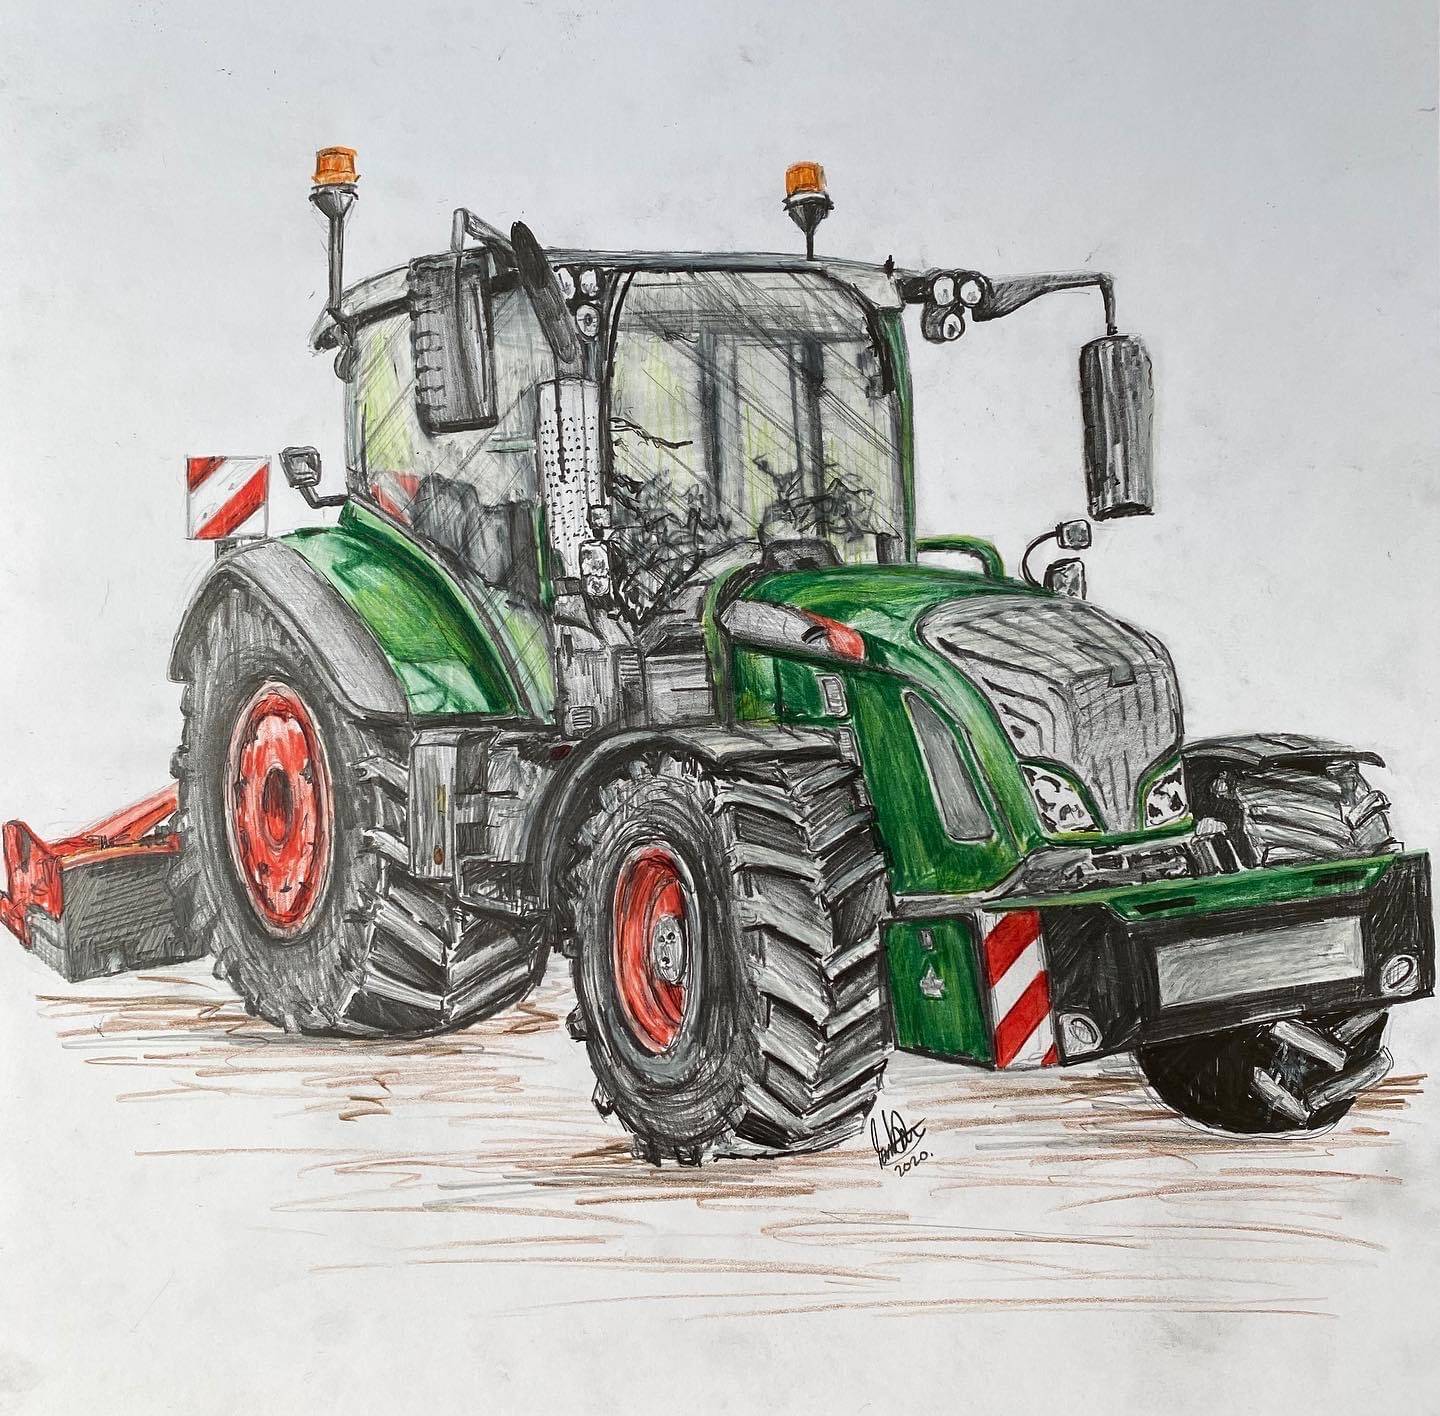 Commission of a tractor in action for a local agricultural services company